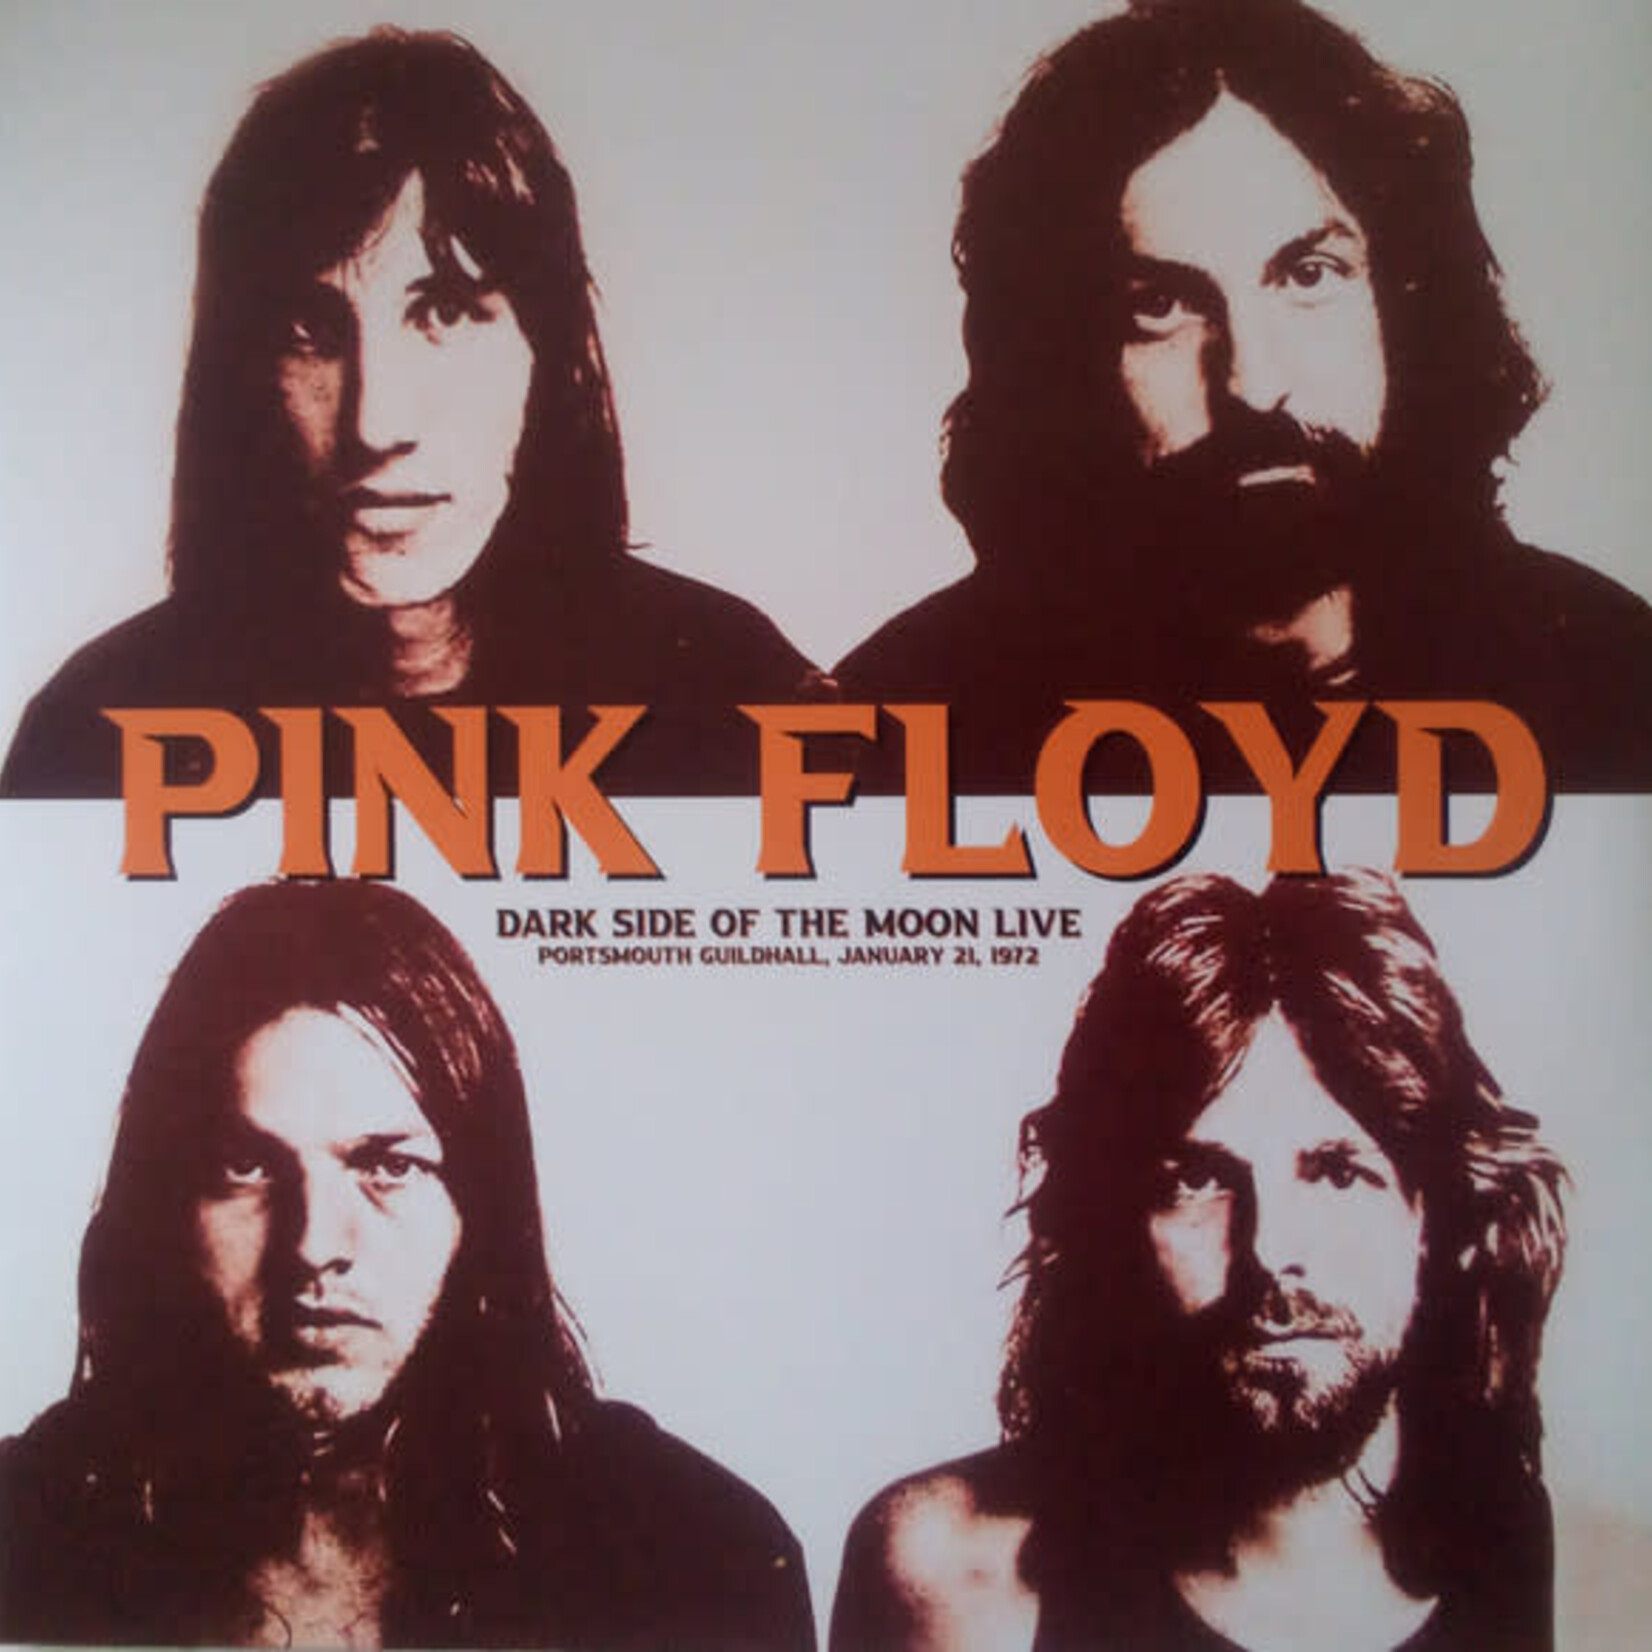 Pink Floyd – Dark Side Of The Moon Live. Portsmouth Guildhall January 21st 1972